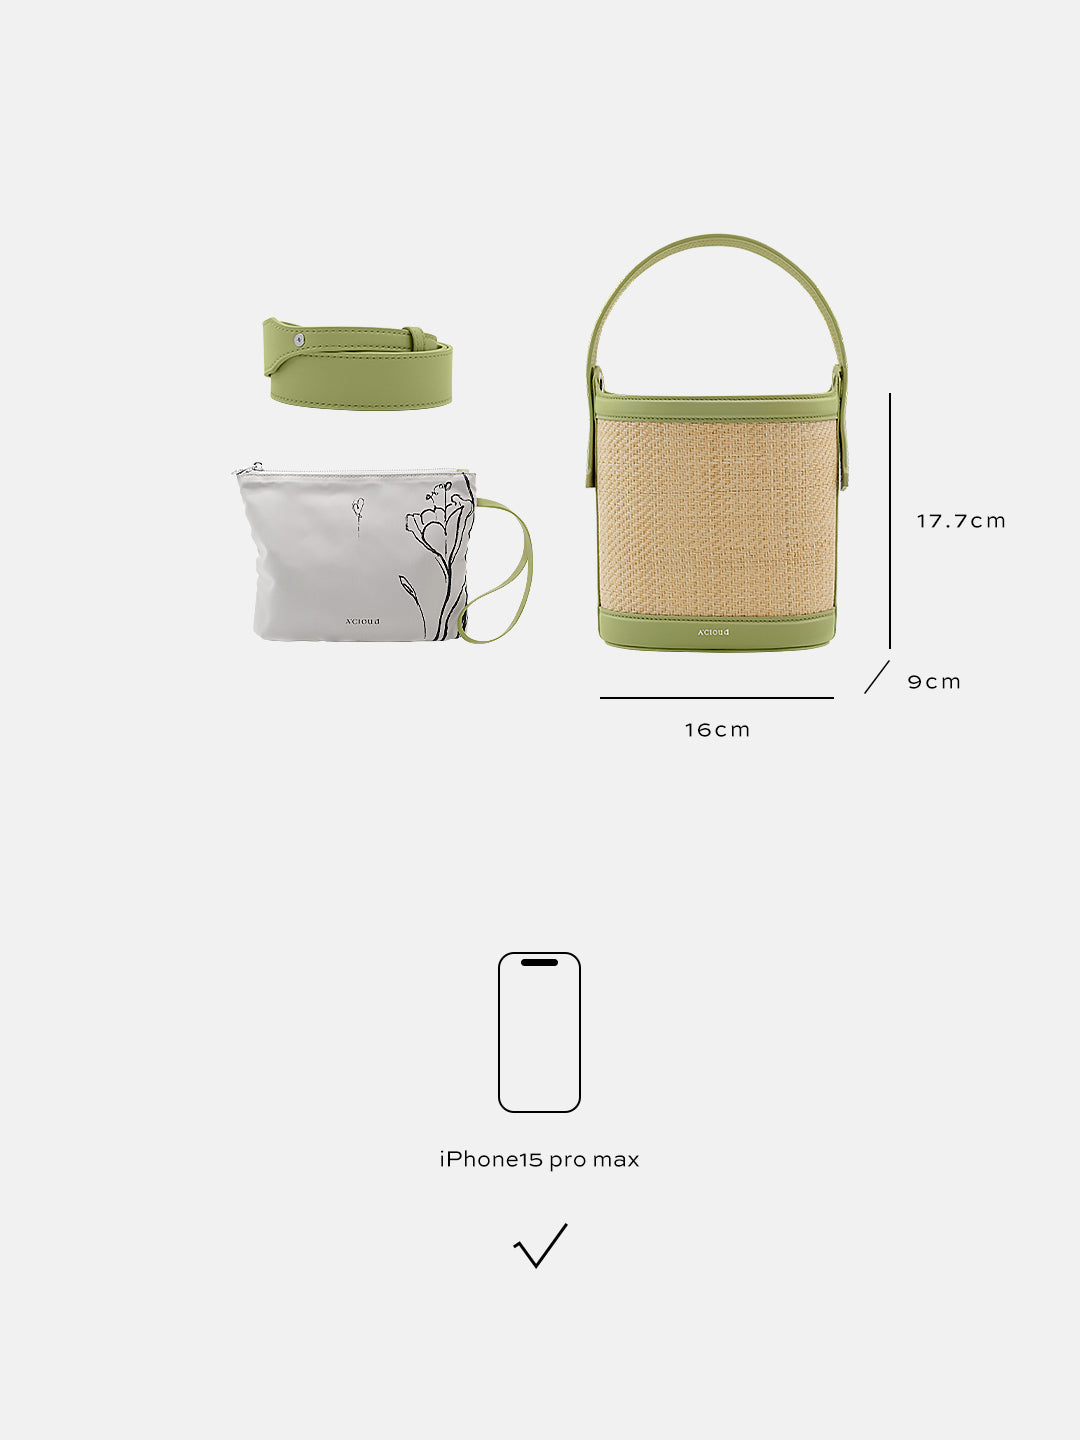 UNBOUNDED·SYMBIOSIS  - Straw Weaving Bucket